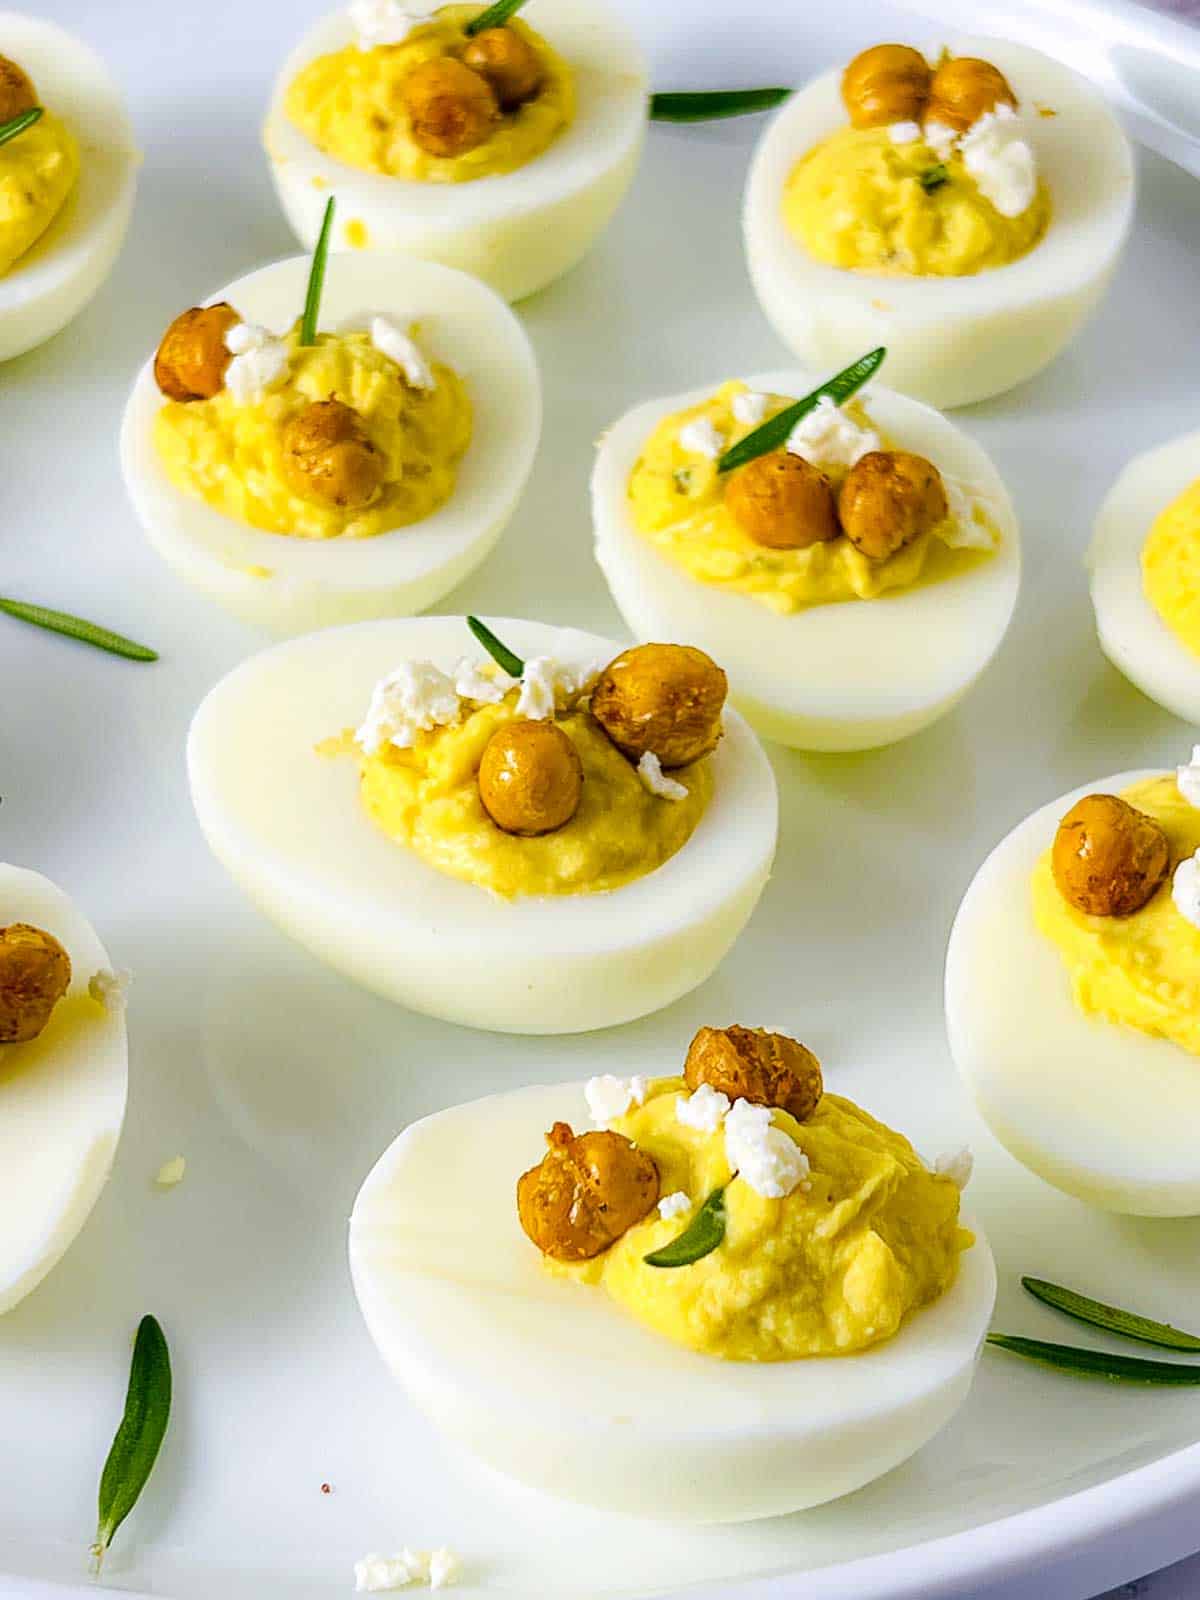 Deviled eggs topped with crumbled feta, roasted chickpeas, and fresh rosemary.